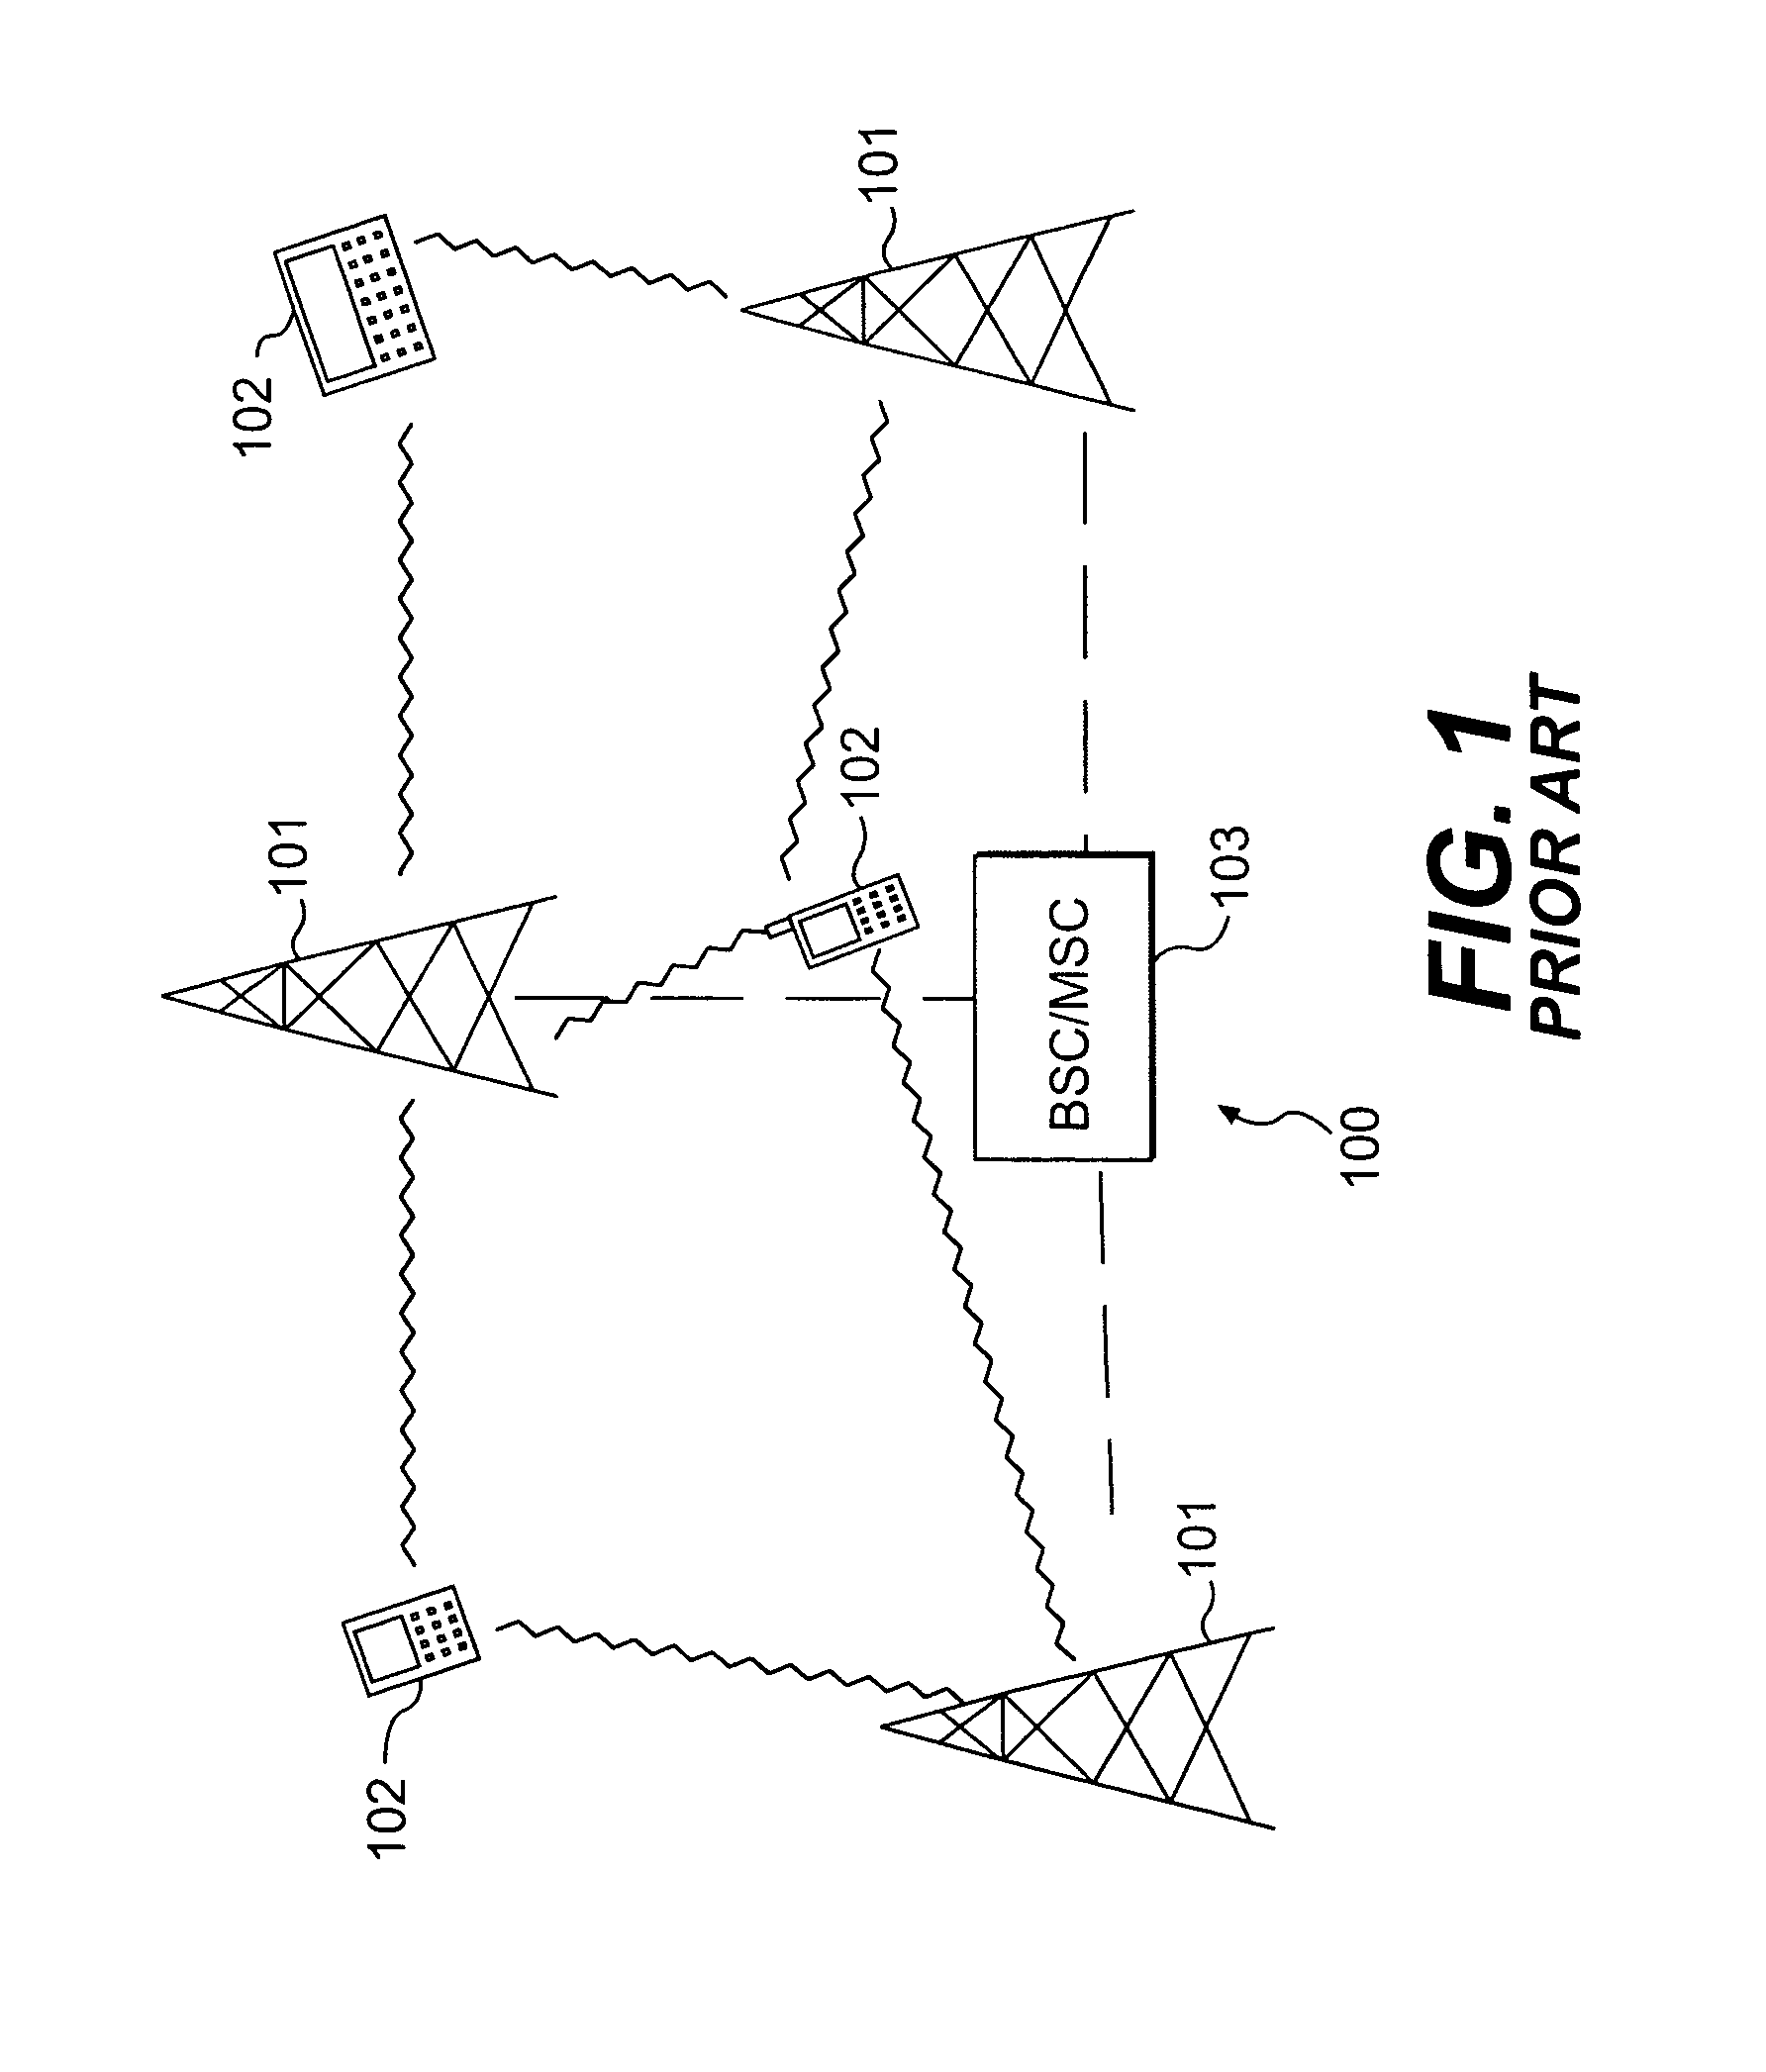 System and method for constructing a carrier to interference matrix based on subscriber calls